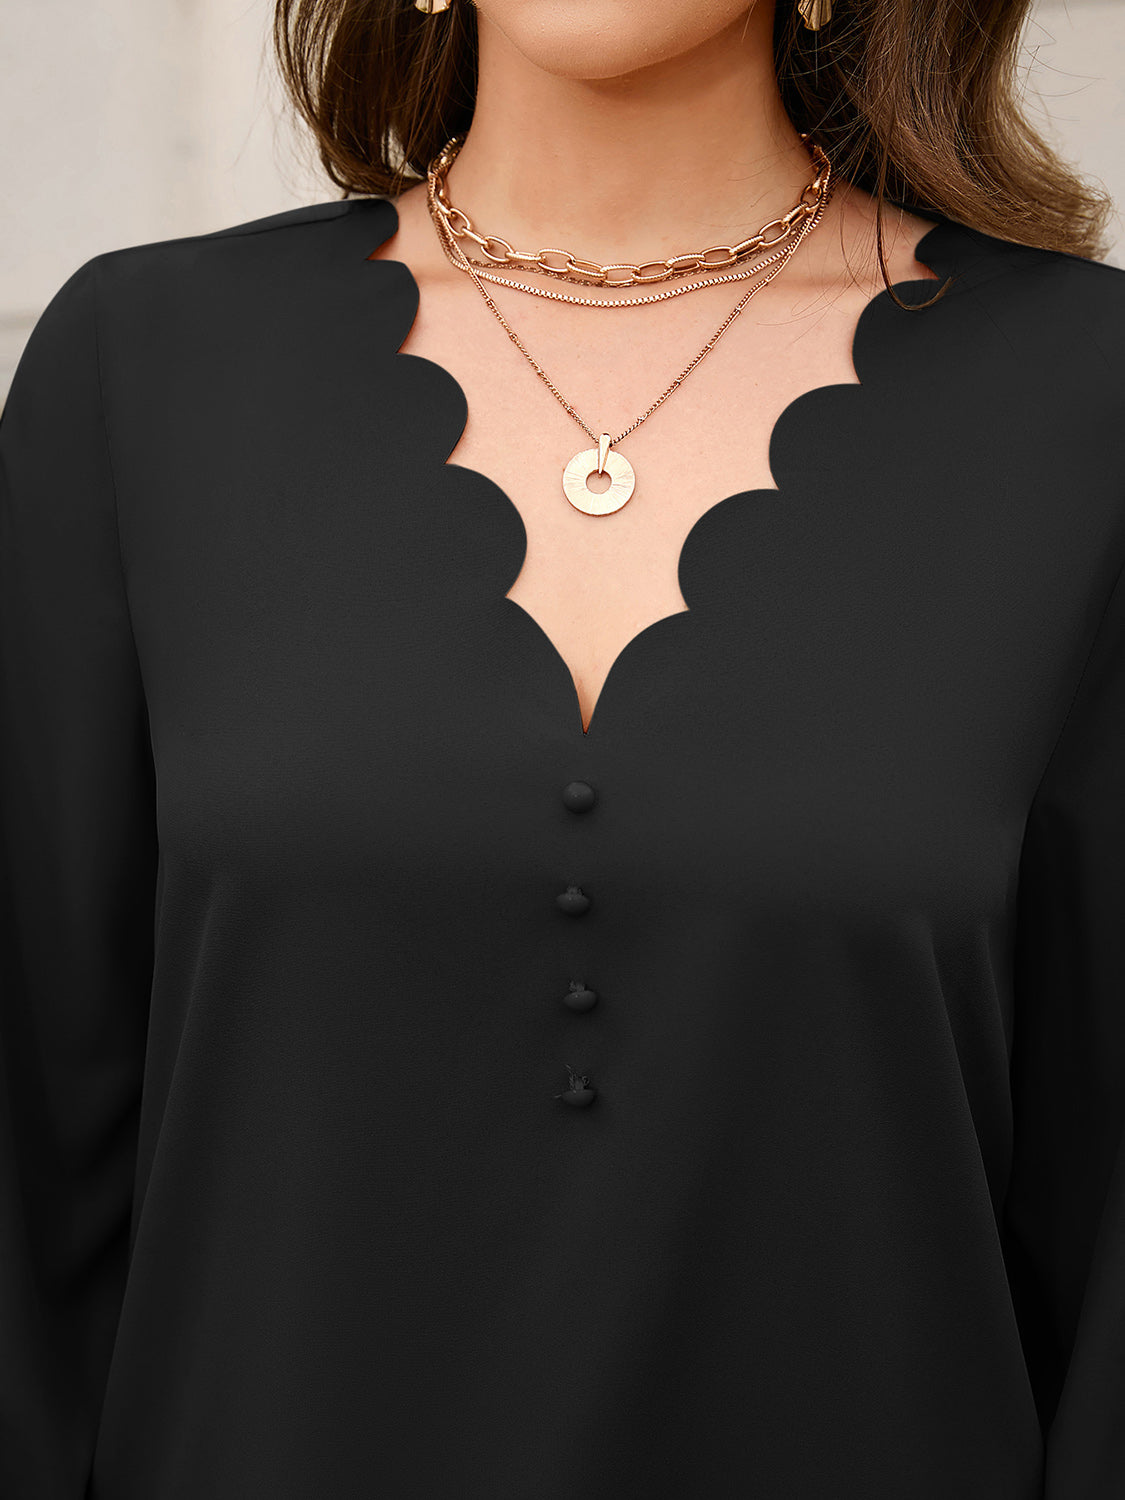 V-Neck Long Sleeve Blouse - Women’s Clothing & Accessories - Shirts & Tops - 12 - 2024